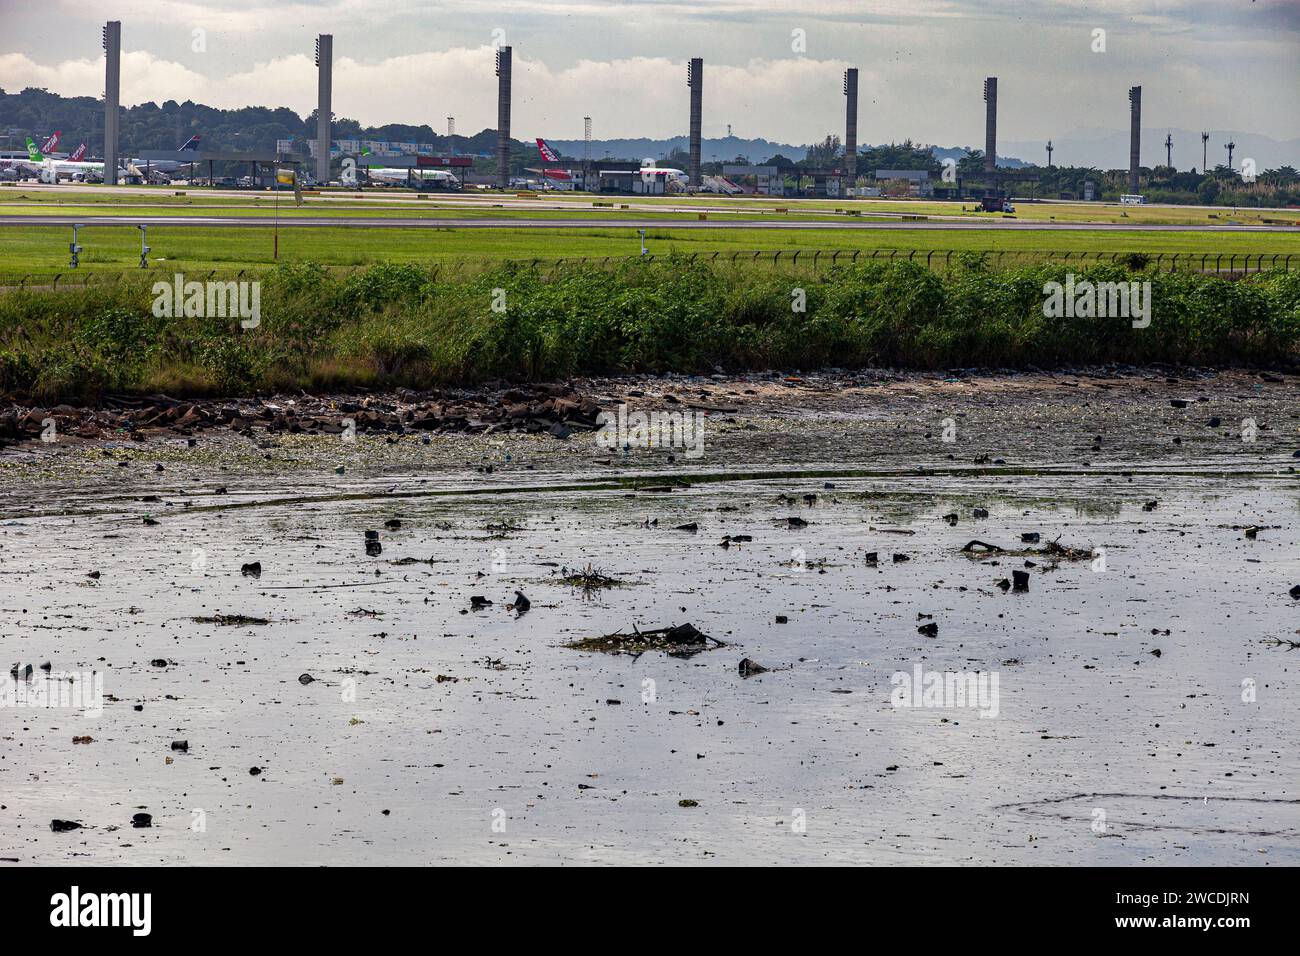 Litter, waste products discarded incorrectly, without consent, at an unsuitable location in Guanabara Bay beside Rio de Janeiro international airport. Stock Photo